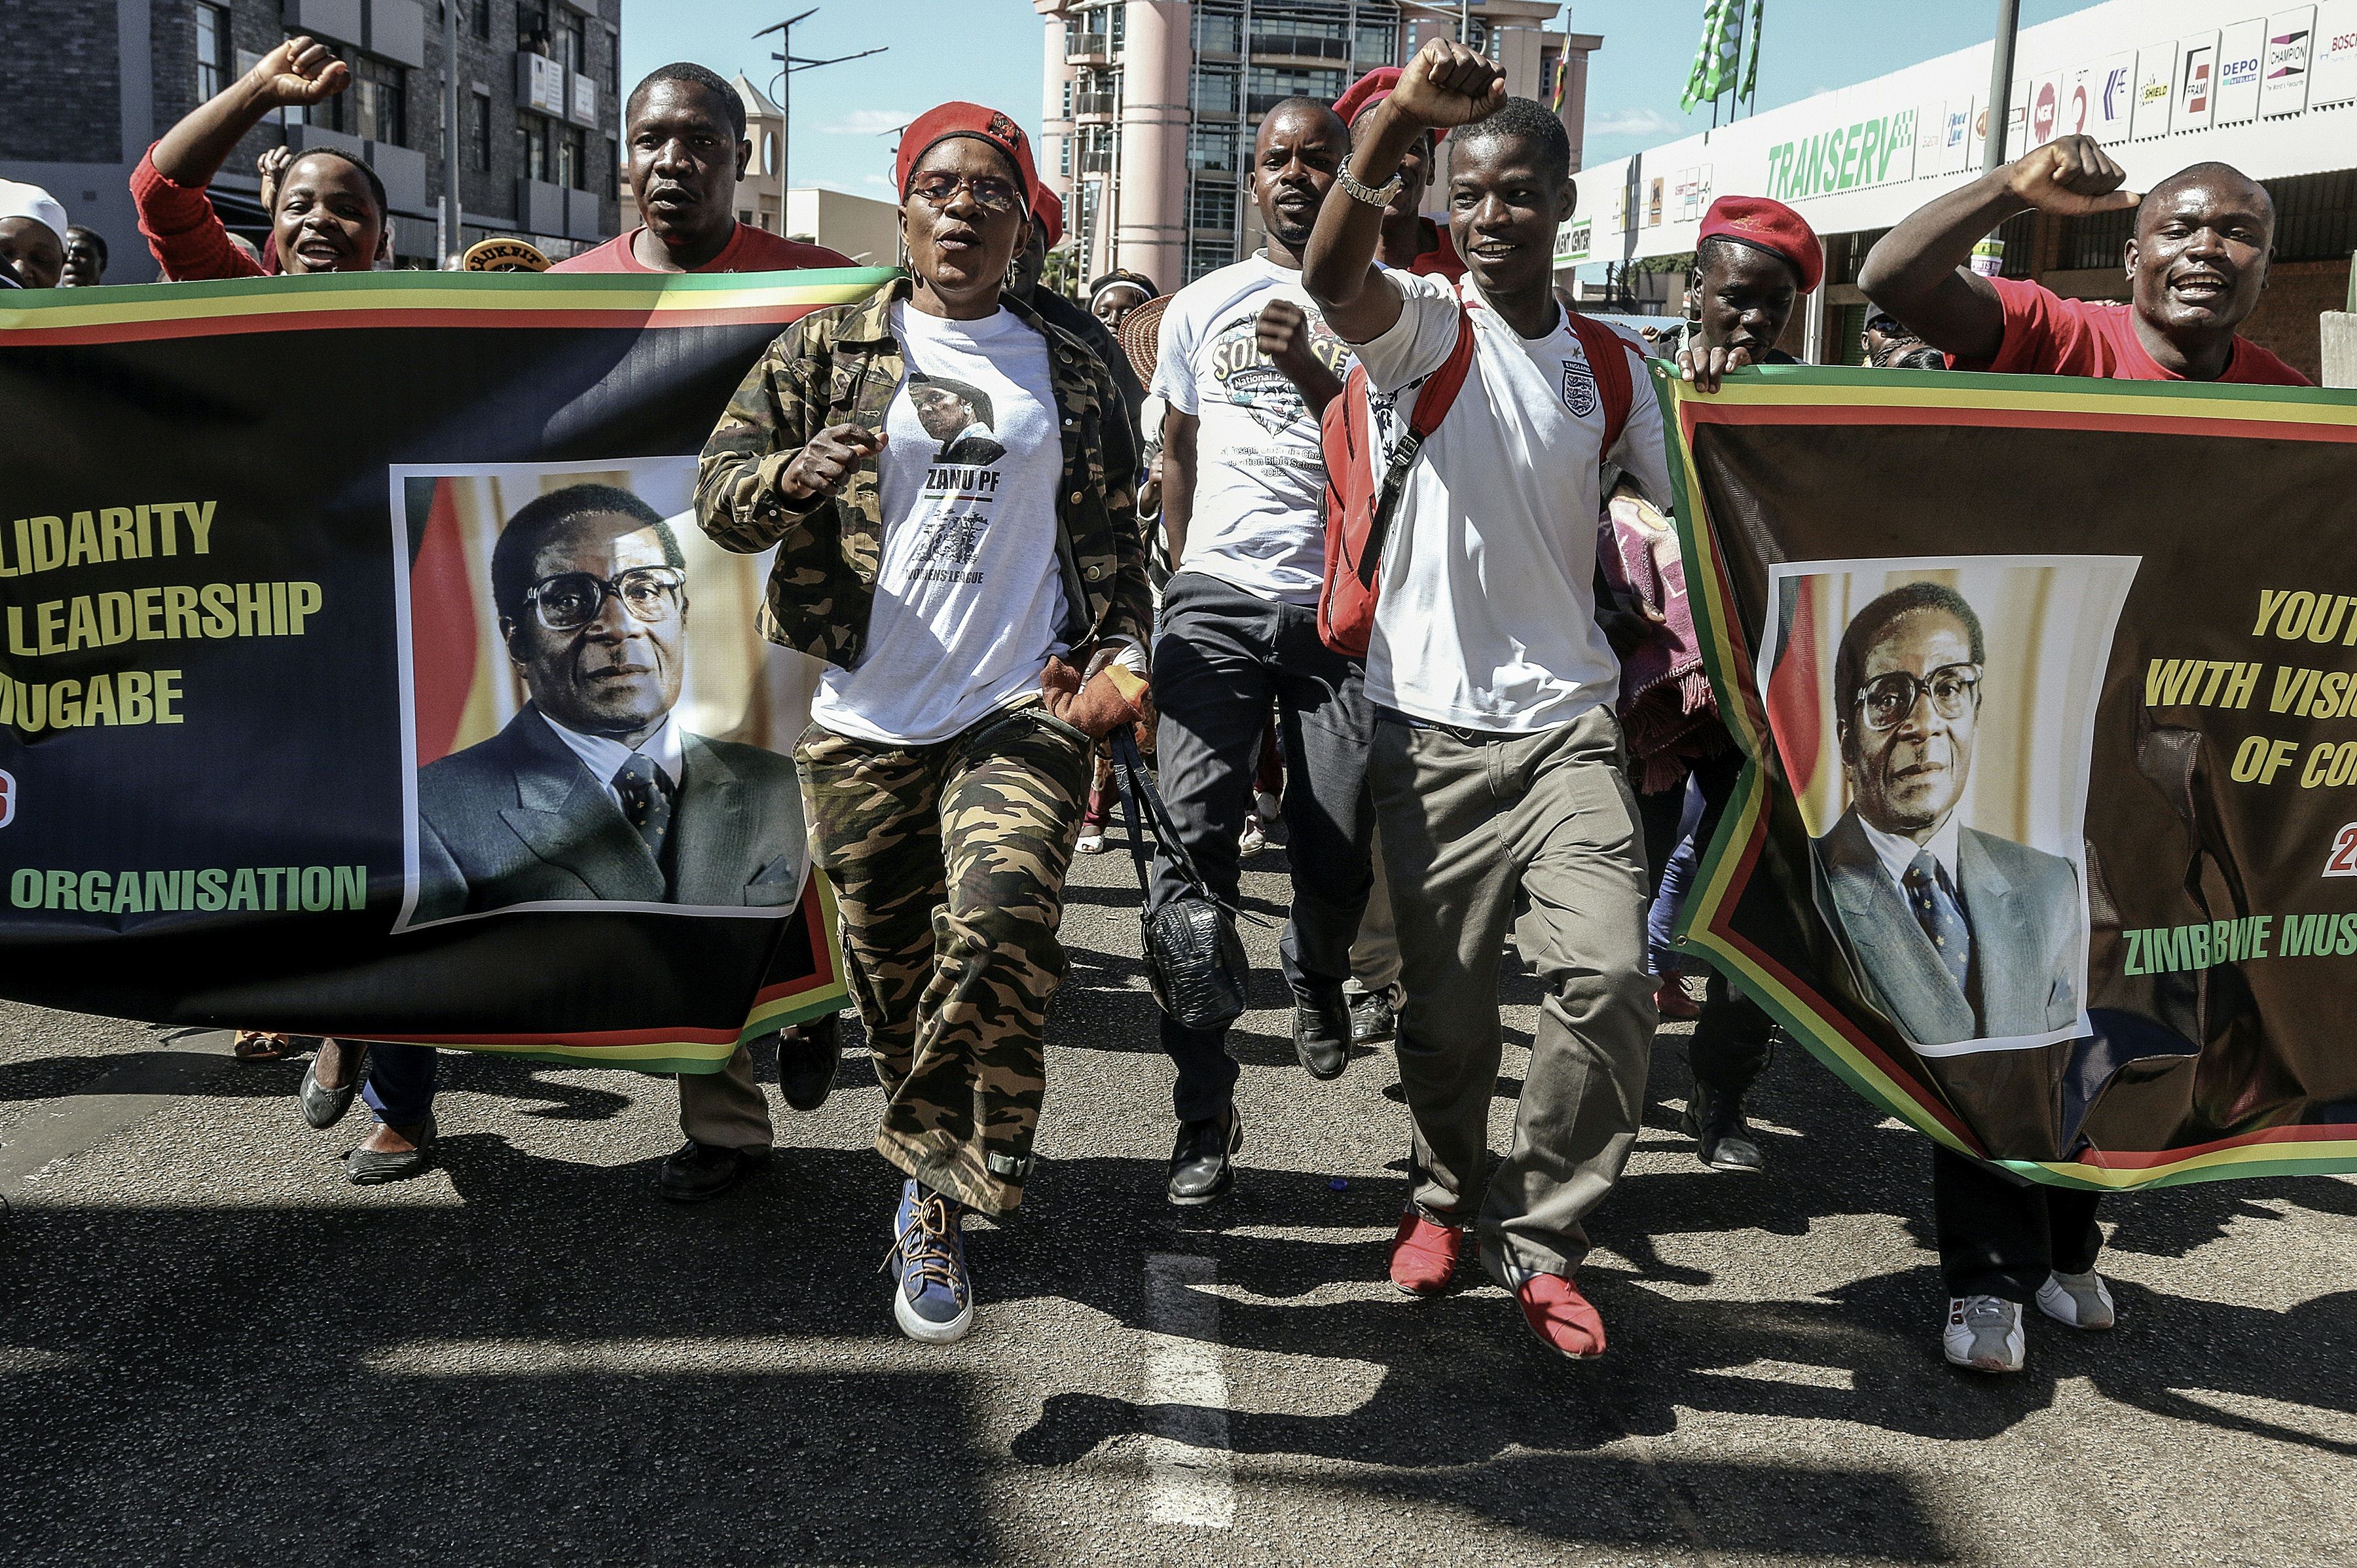 Youth Supporters of Zimbabwean President cheer during the Zimbabwe African National Union Patriotic Front "One Million Youth March" on May 25, 2016 in Harare (Jekesai Njikizana—AFP/Getty Images)